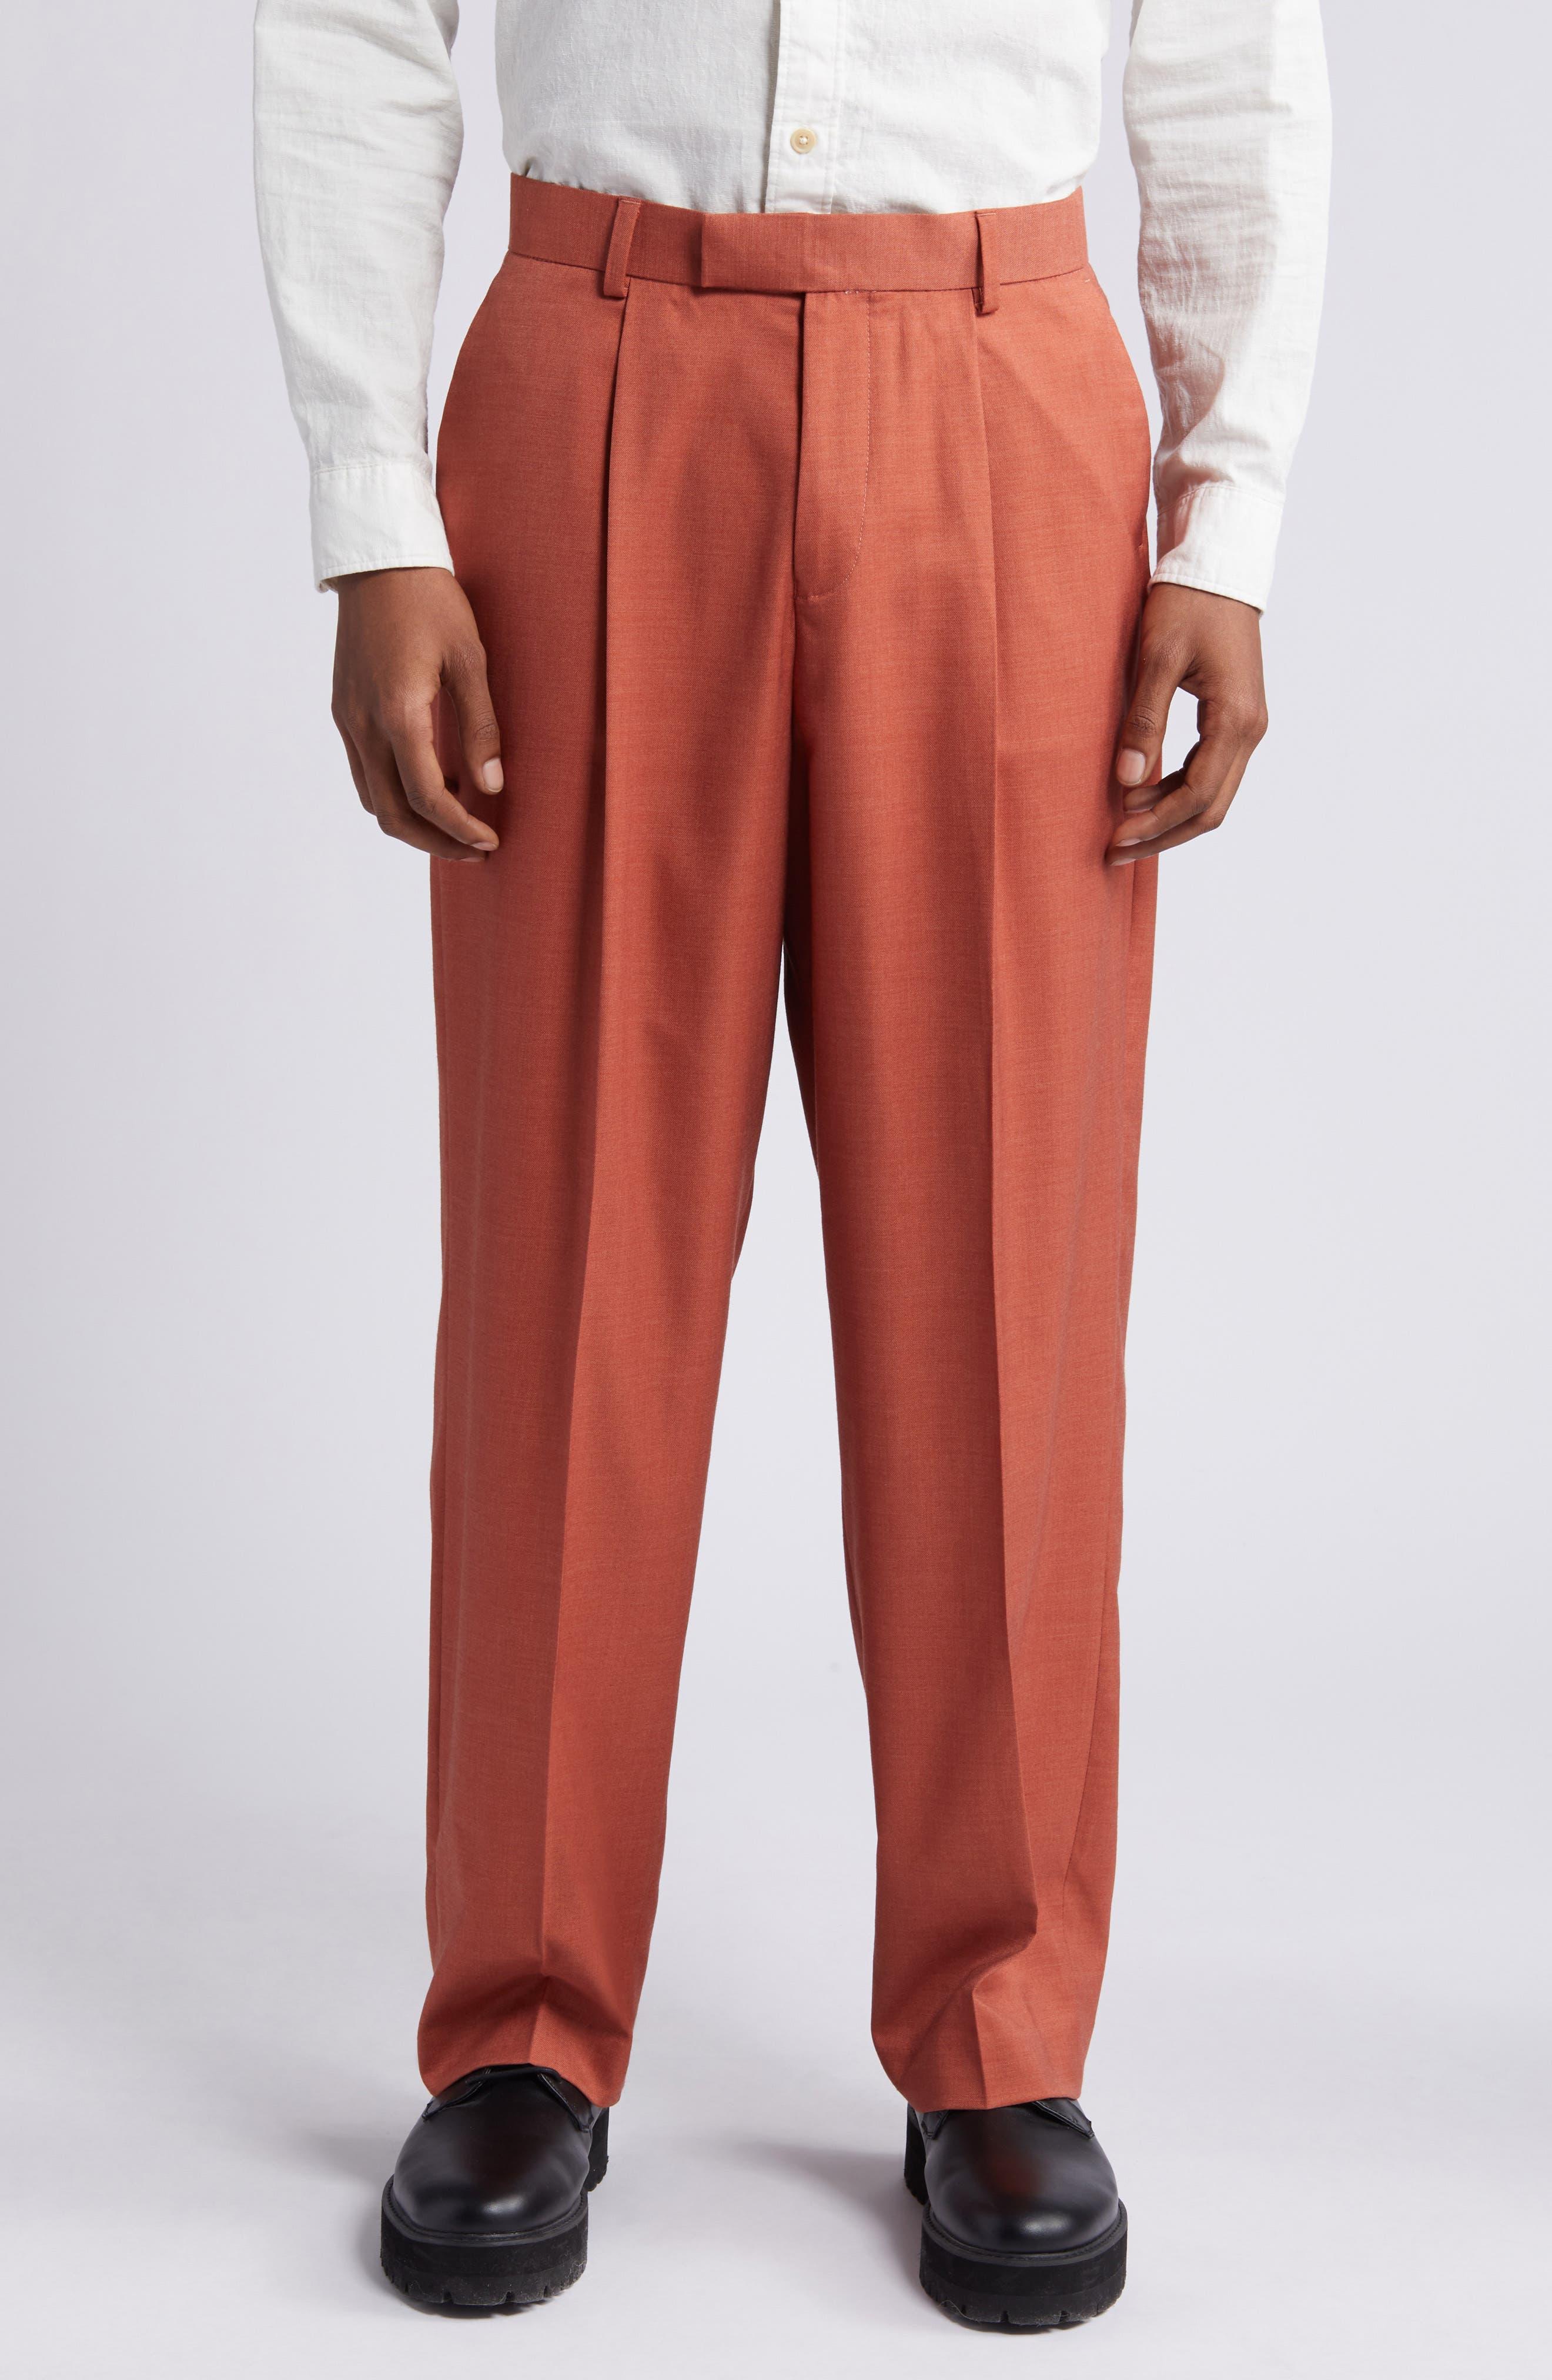 Topman tapered wool mix trousers with elasticated waistband in black |  www.visionbound.com